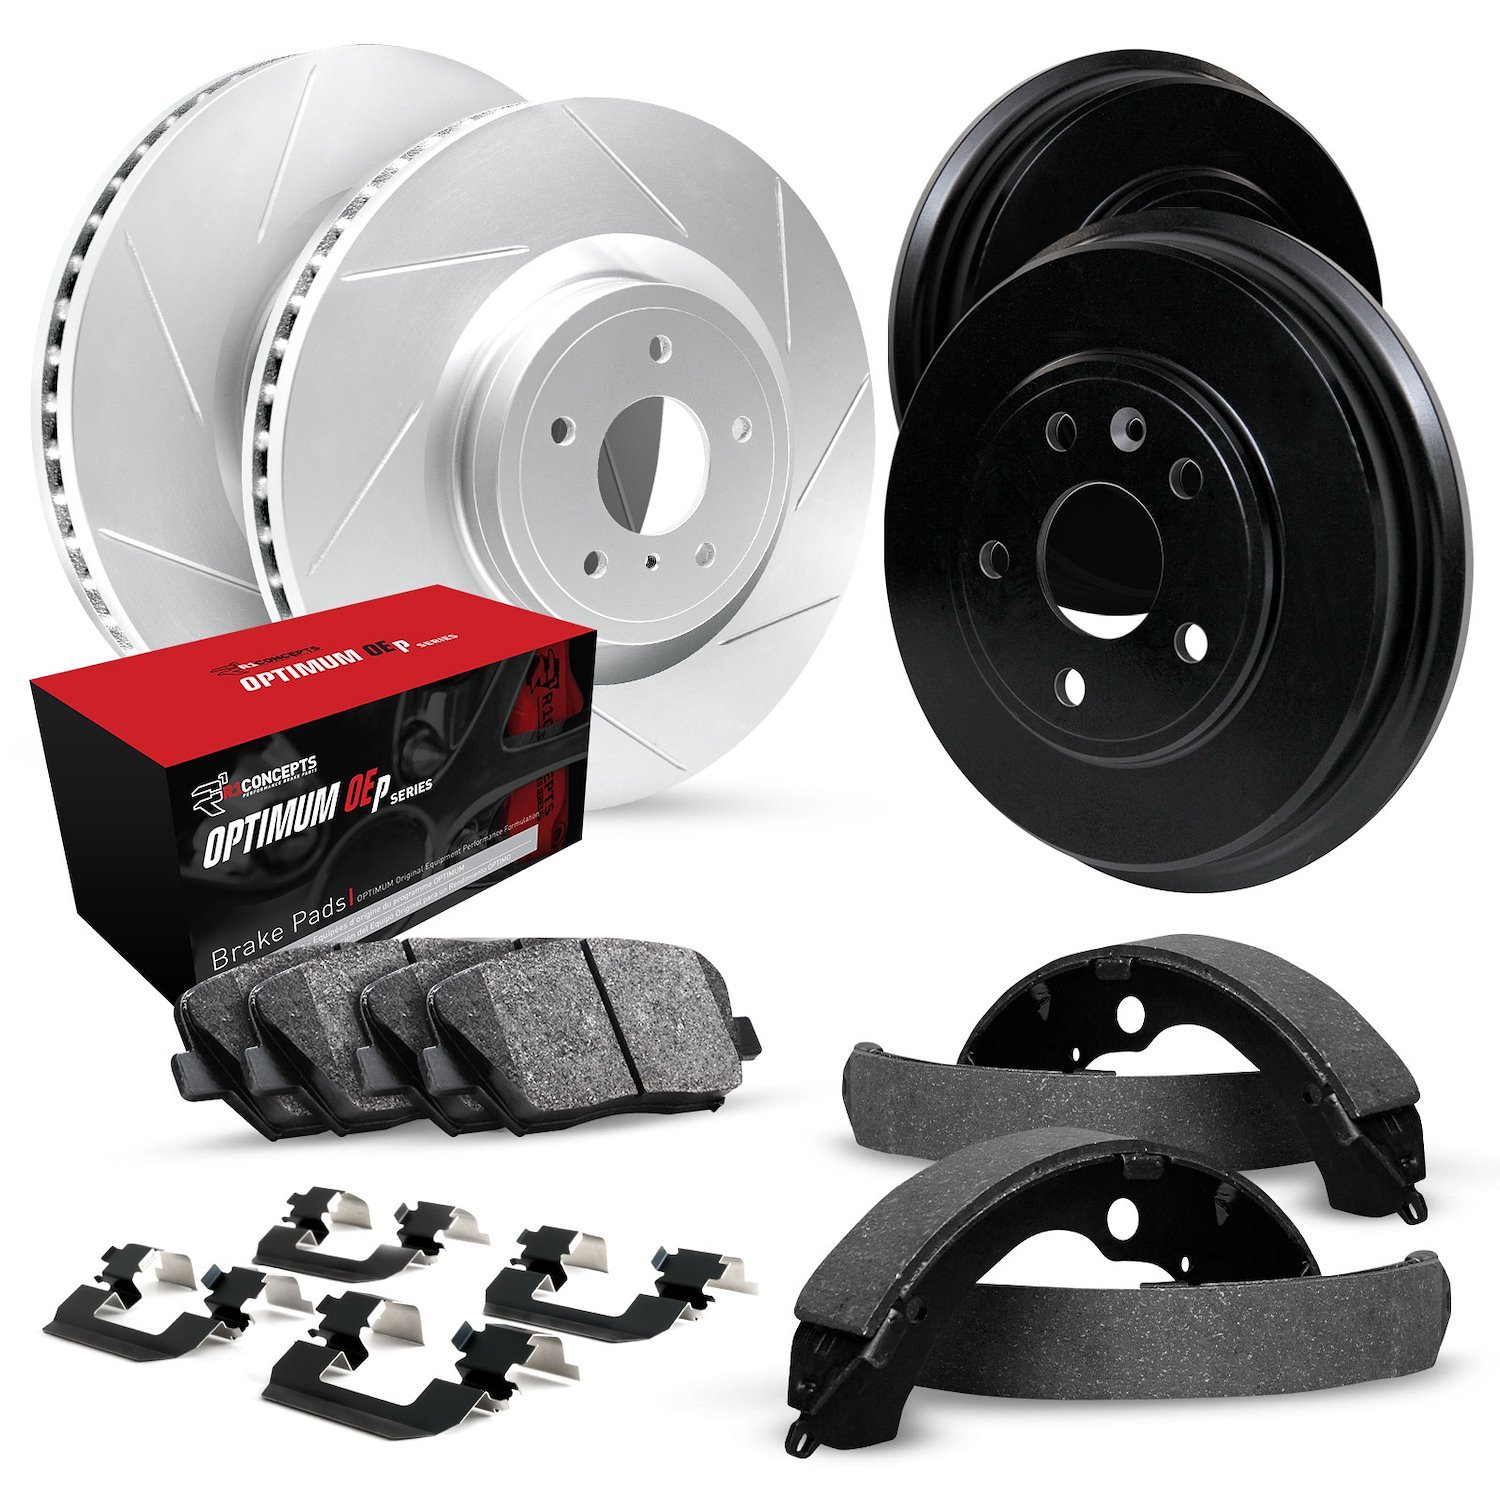 GEO-Carbon Slotted Brake Rotor & Drum Set w/Optimum OE Pads, Shoes, & Hardware, 1995-1997 Ford/Lincoln/Mercury/Mazda